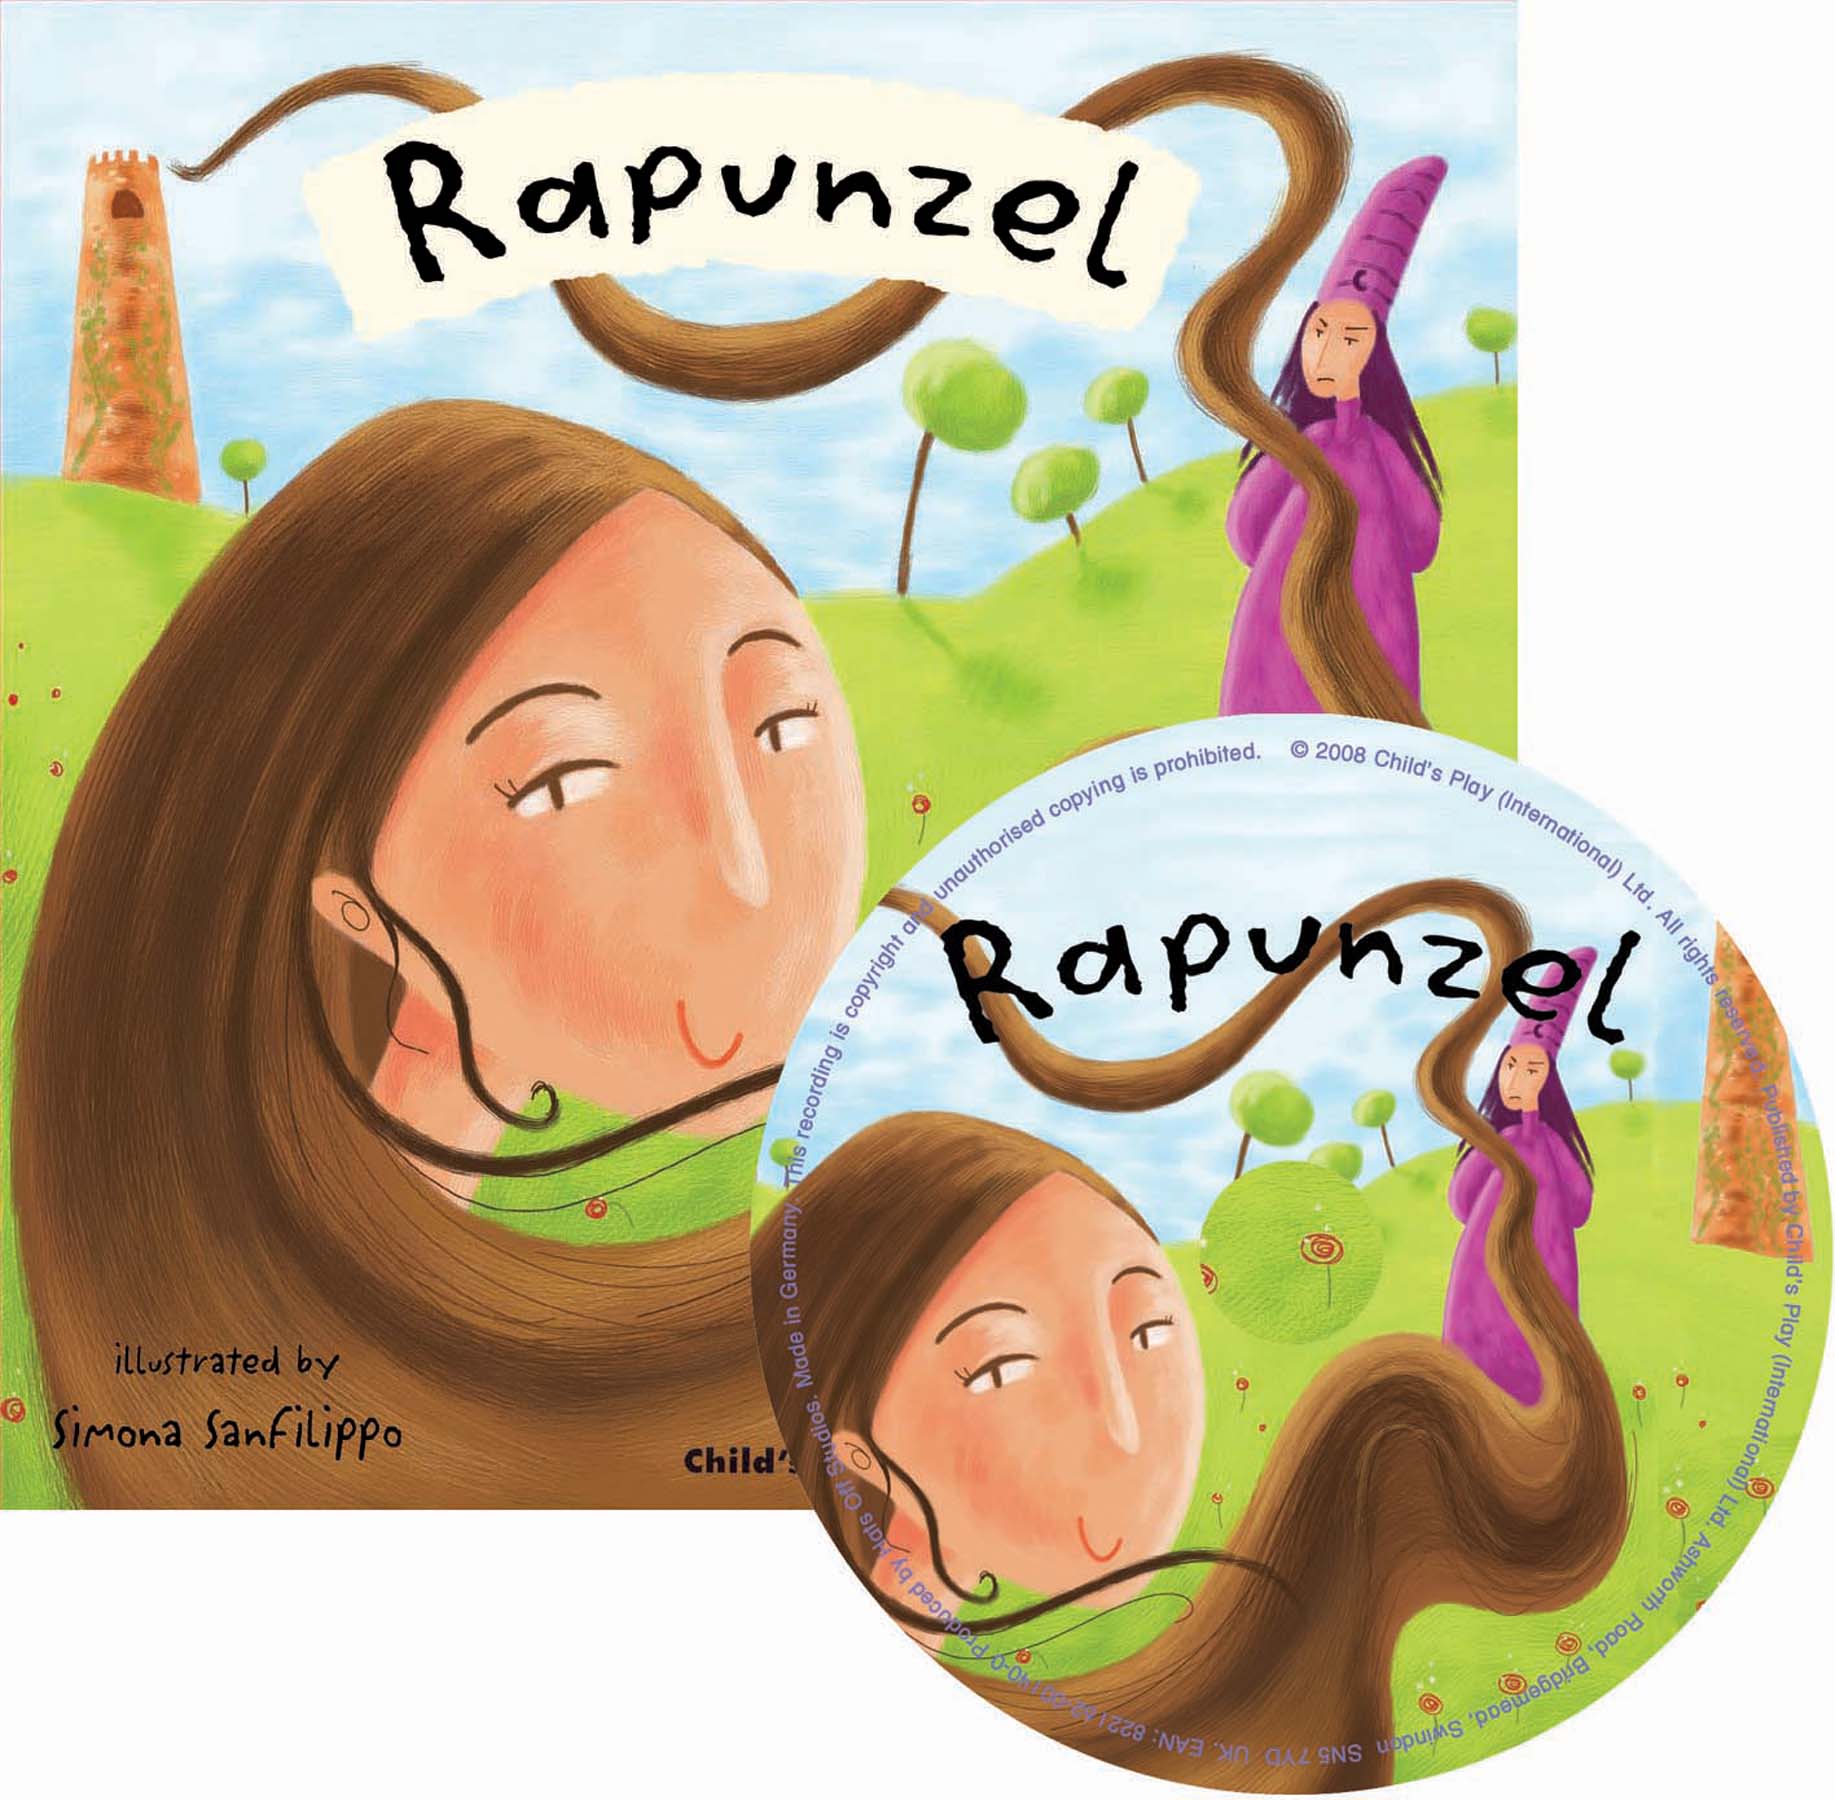 Rapunzel (Softcover and CD Edition)